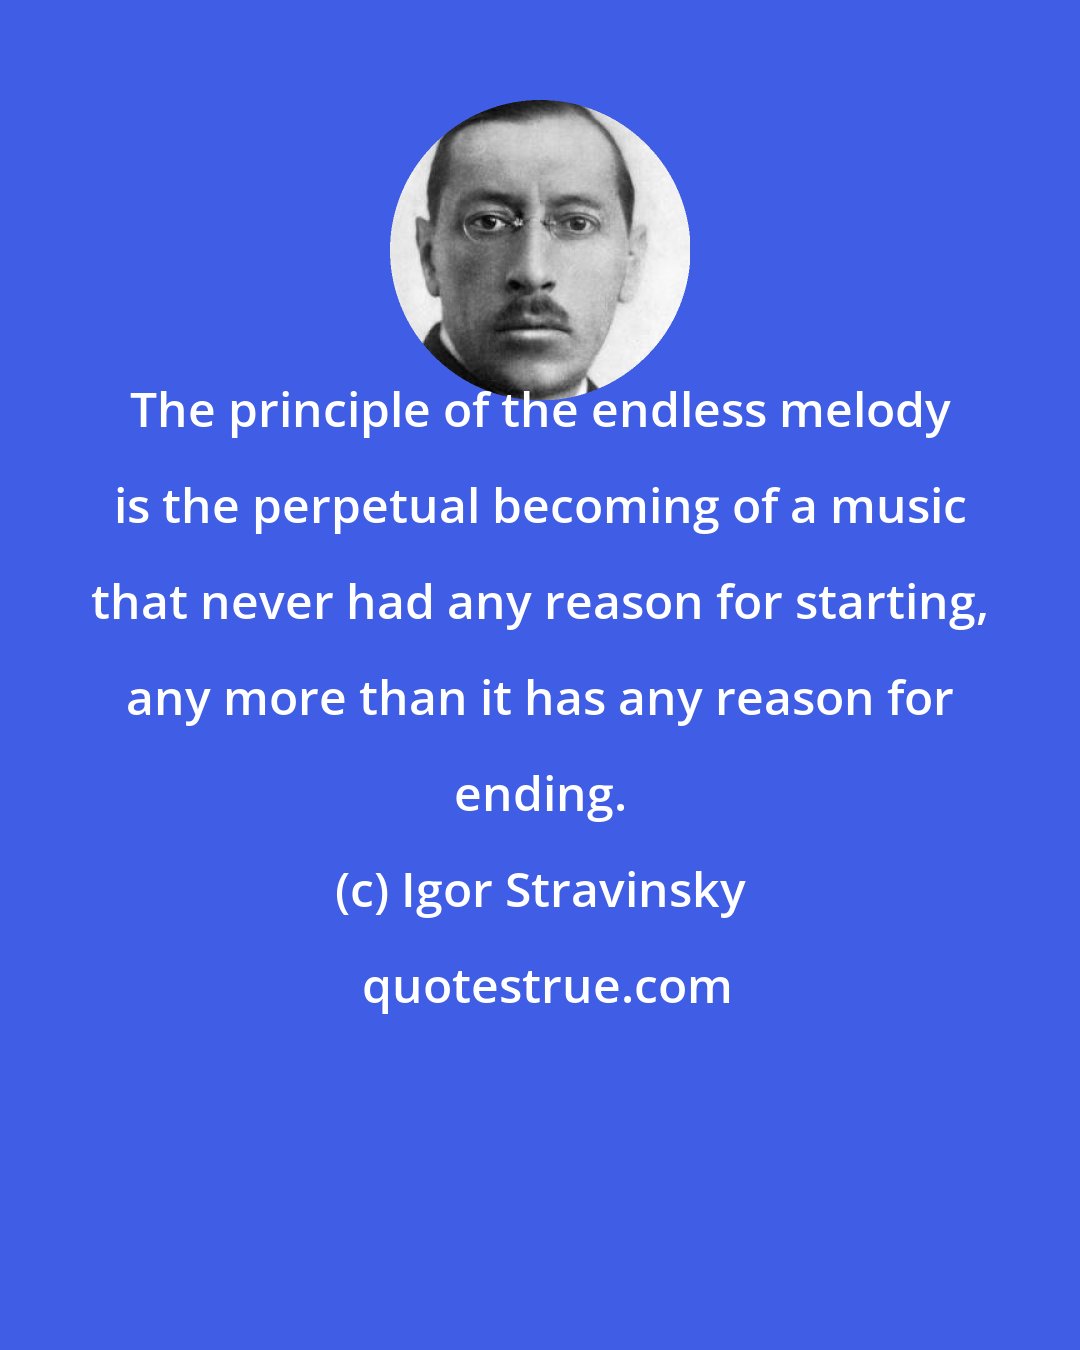 Igor Stravinsky: The principle of the endless melody is the perpetual becoming of a music that never had any reason for starting, any more than it has any reason for ending.